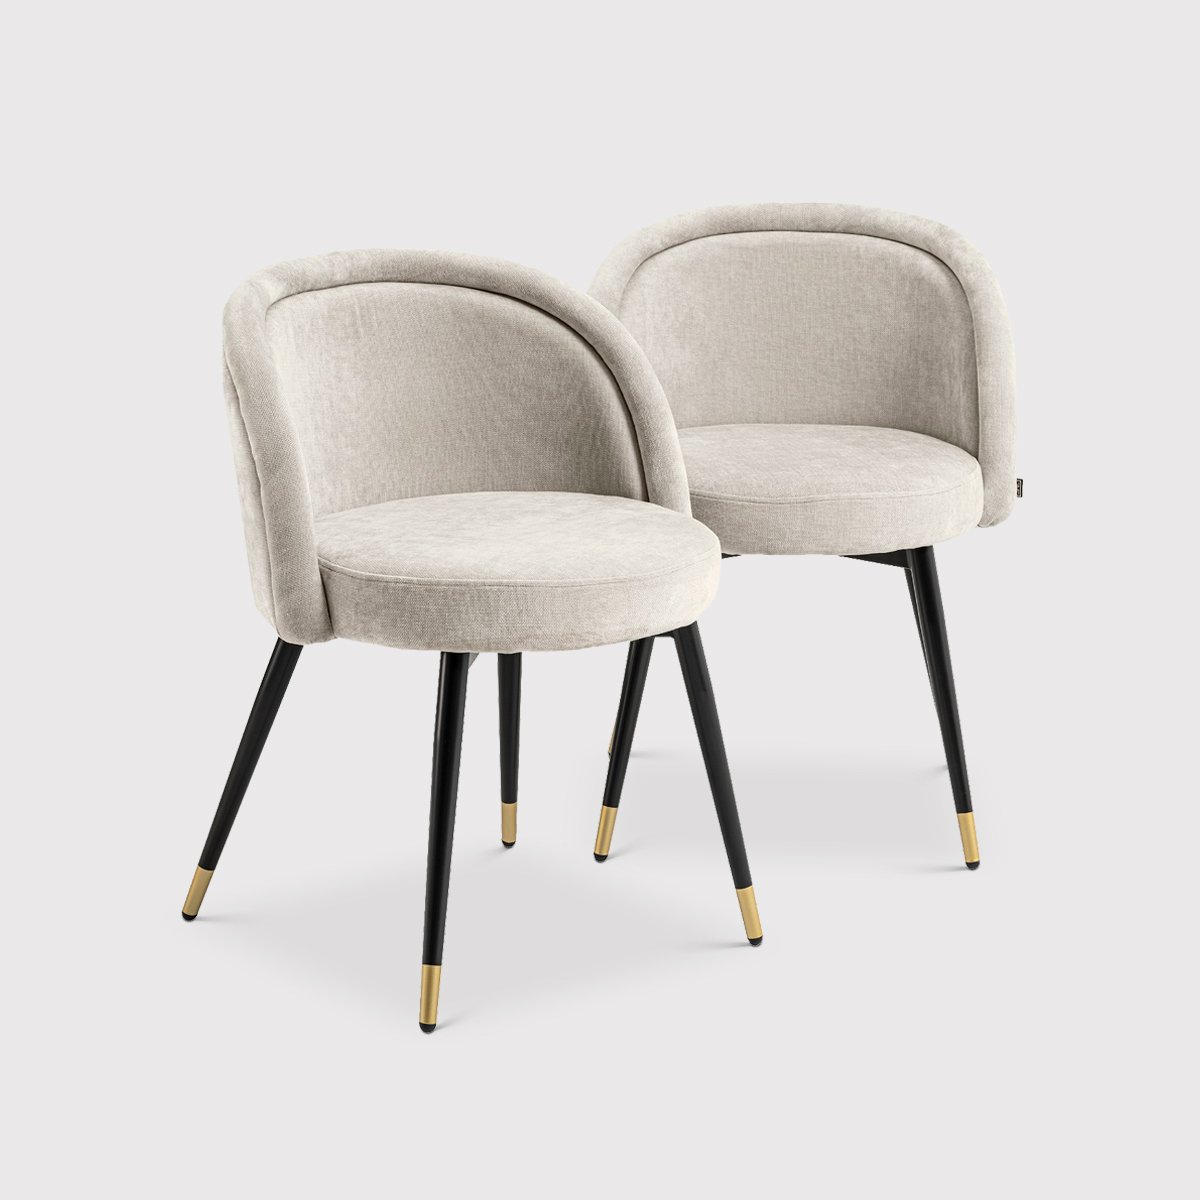 Eichholtz Chloe Set of 2 Dining Chairs, Neutral Fabric | Barker & Stonehouse